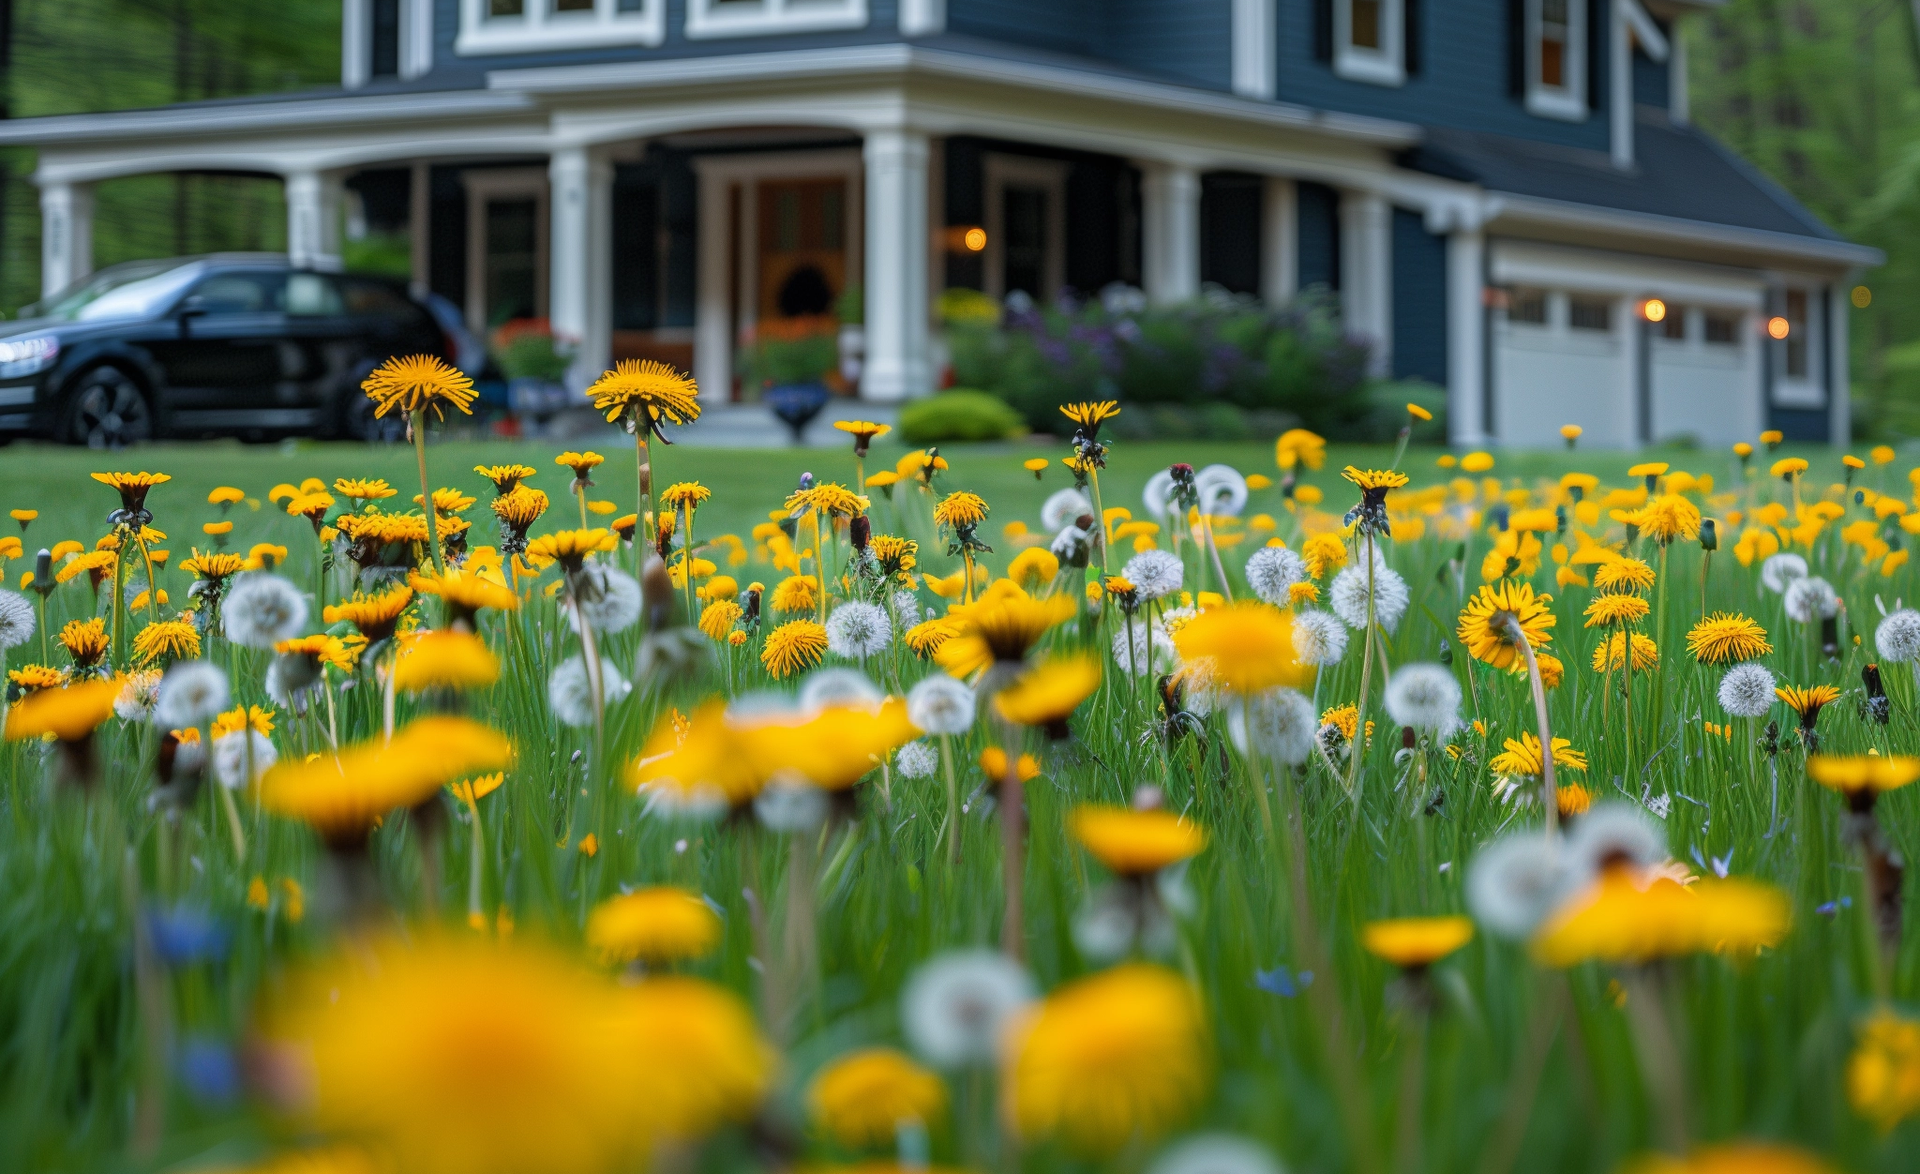 A beautiful house with a yard full of dandelions and other weeds.